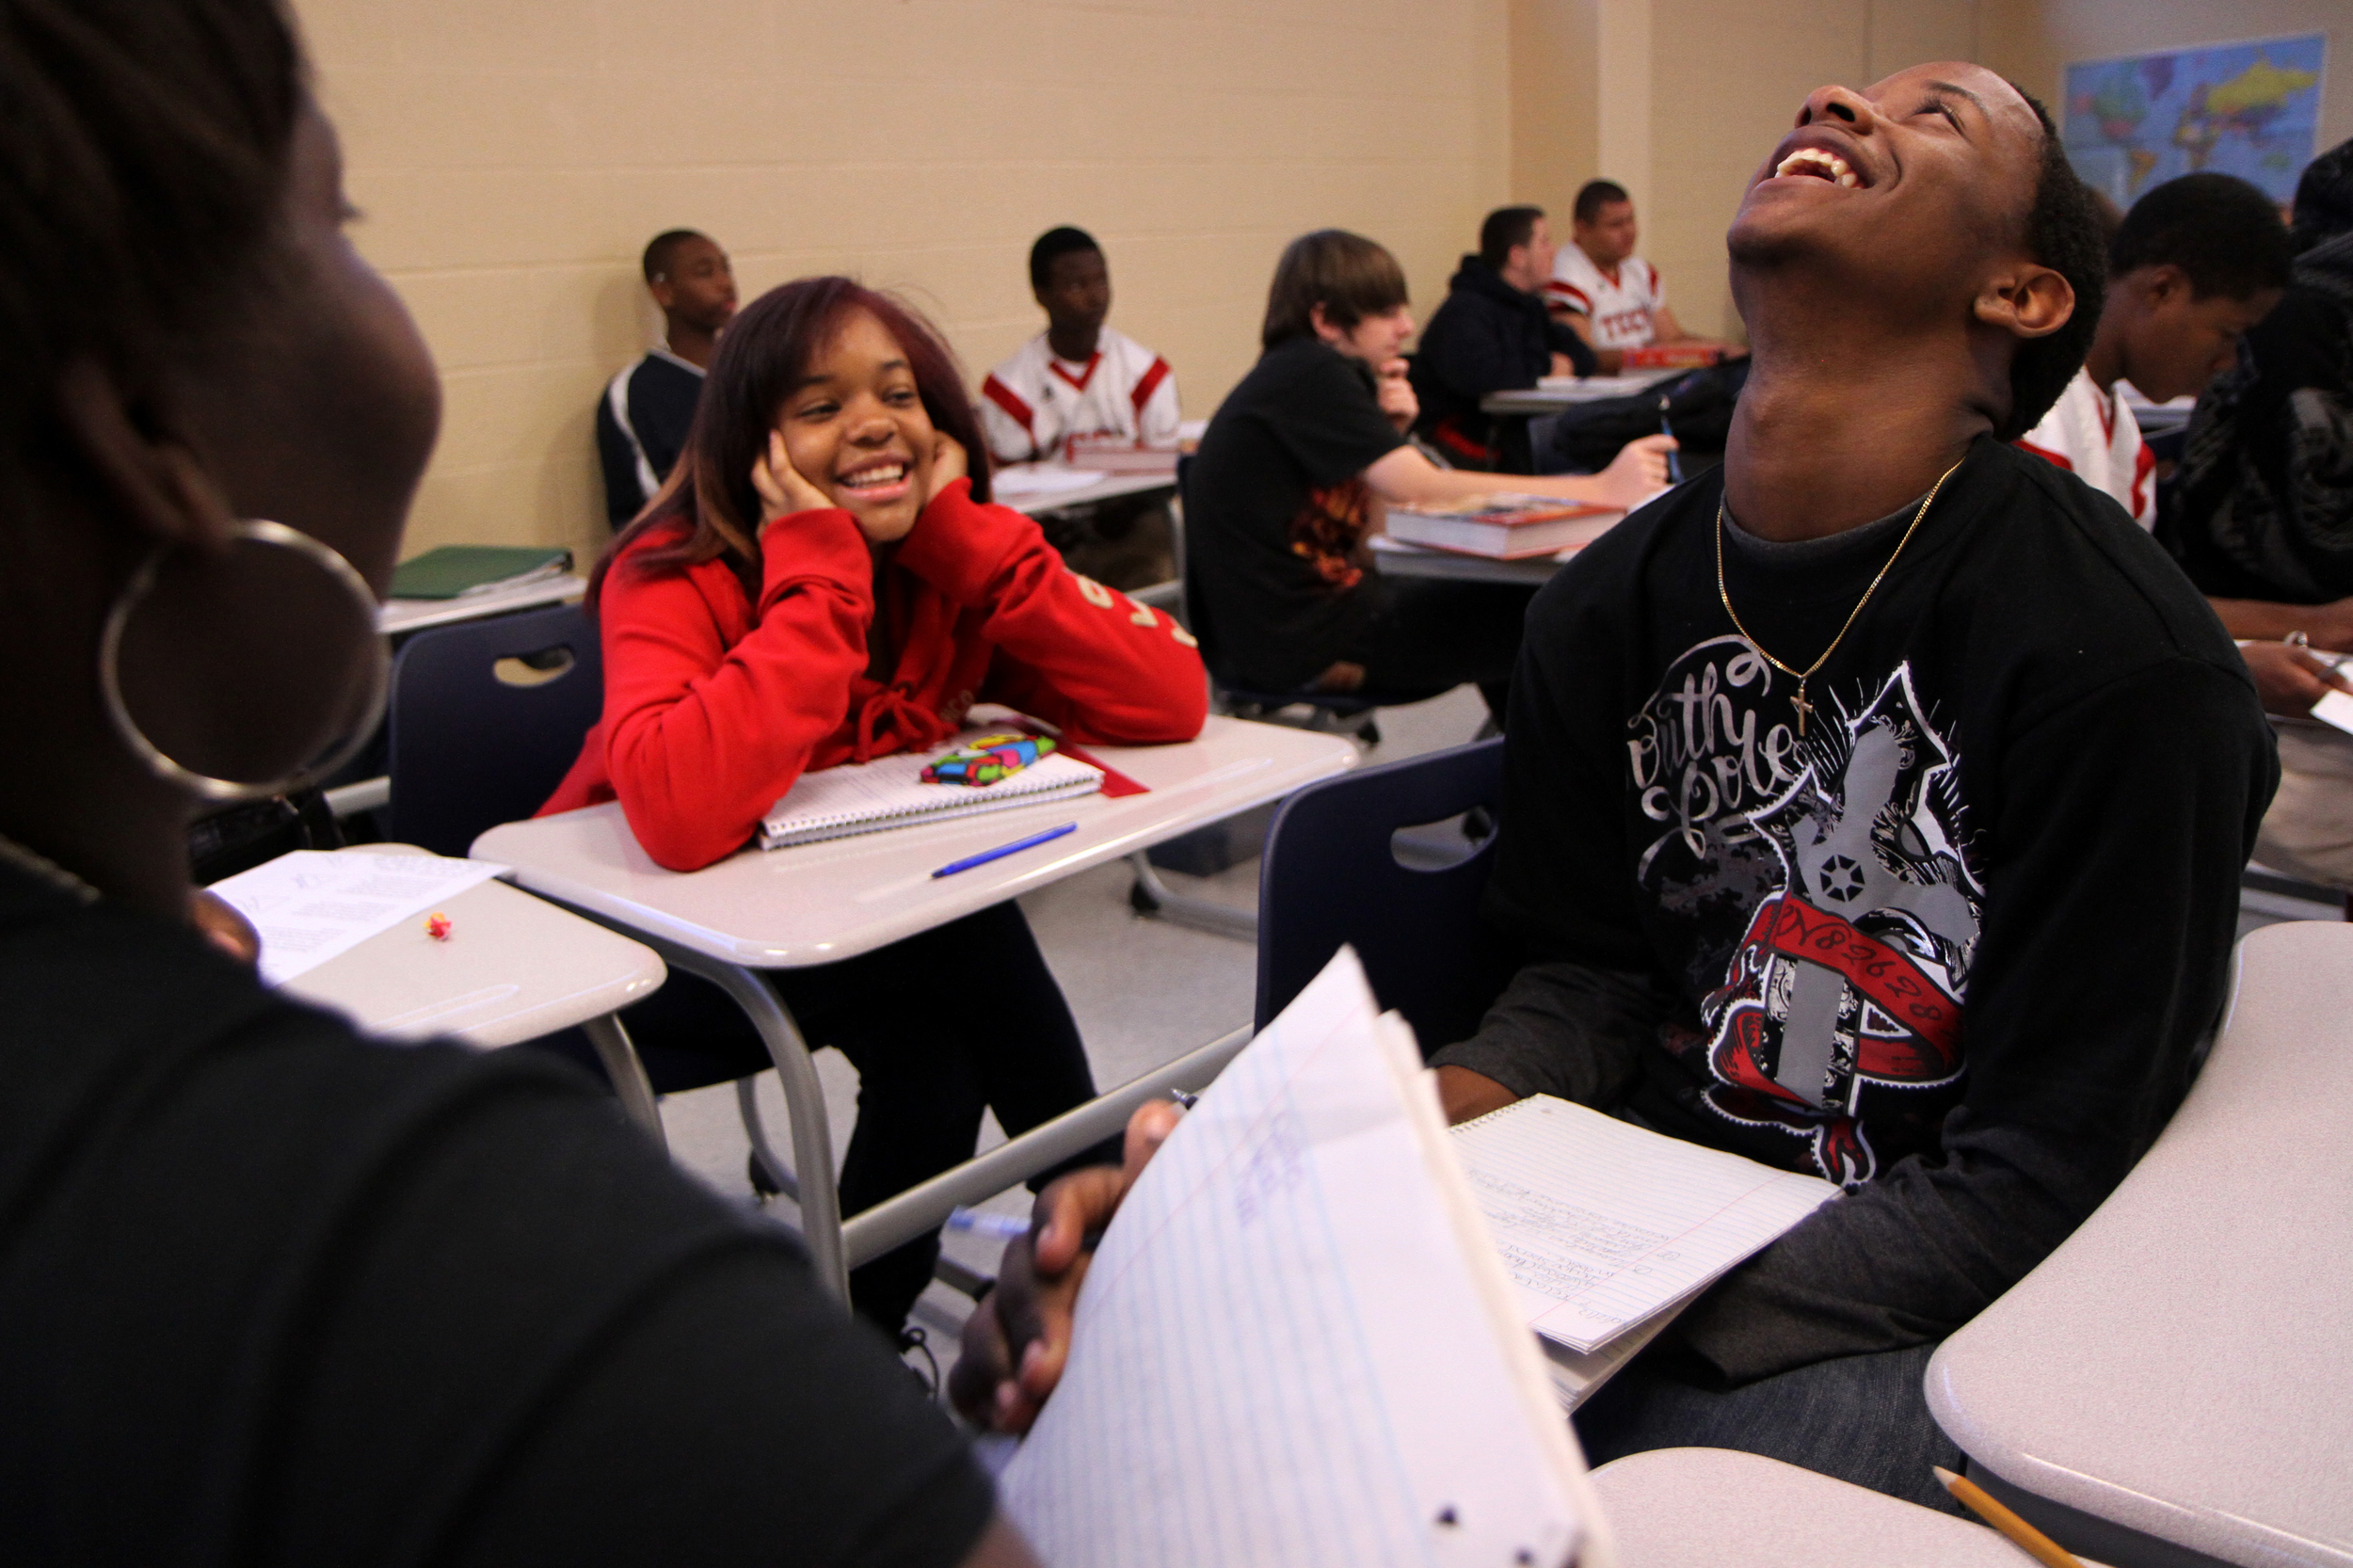  Tigner and his classmates laugh during economics class while discussing what material things are worth buying after inflation. Their wants and needs don't seem to match up. 